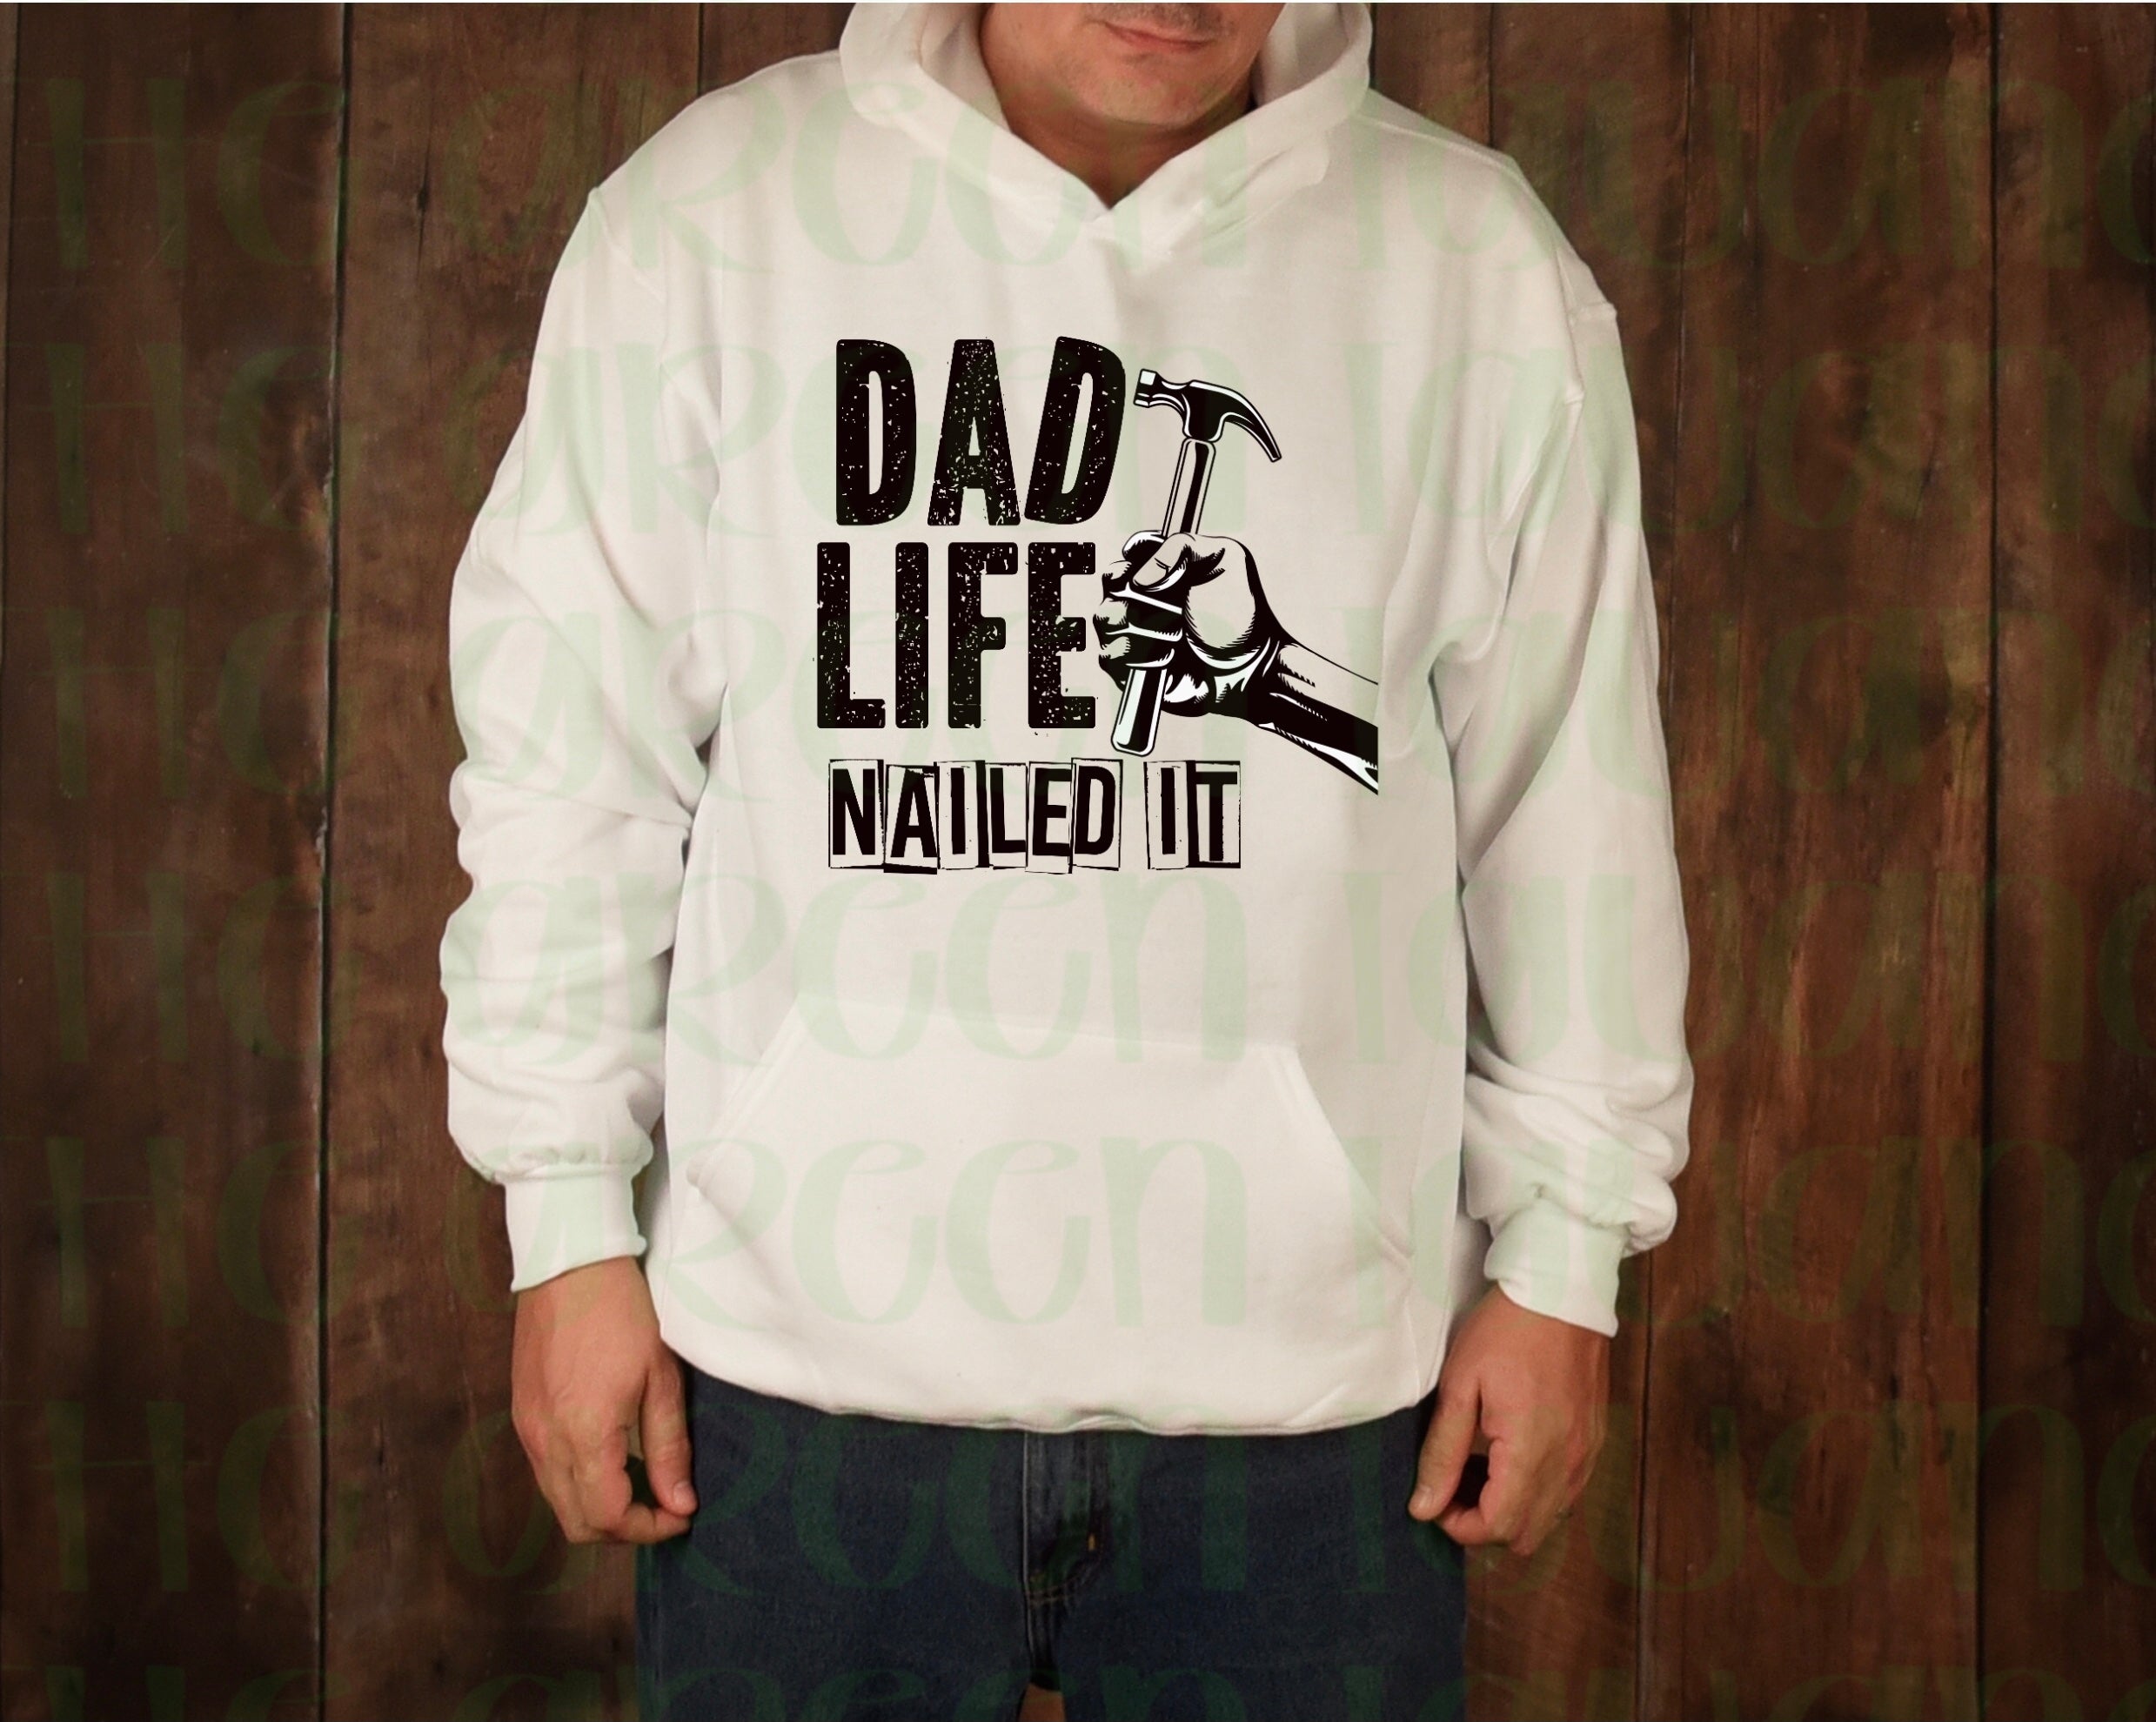 Dad Life. Nailed it - DTF transfer